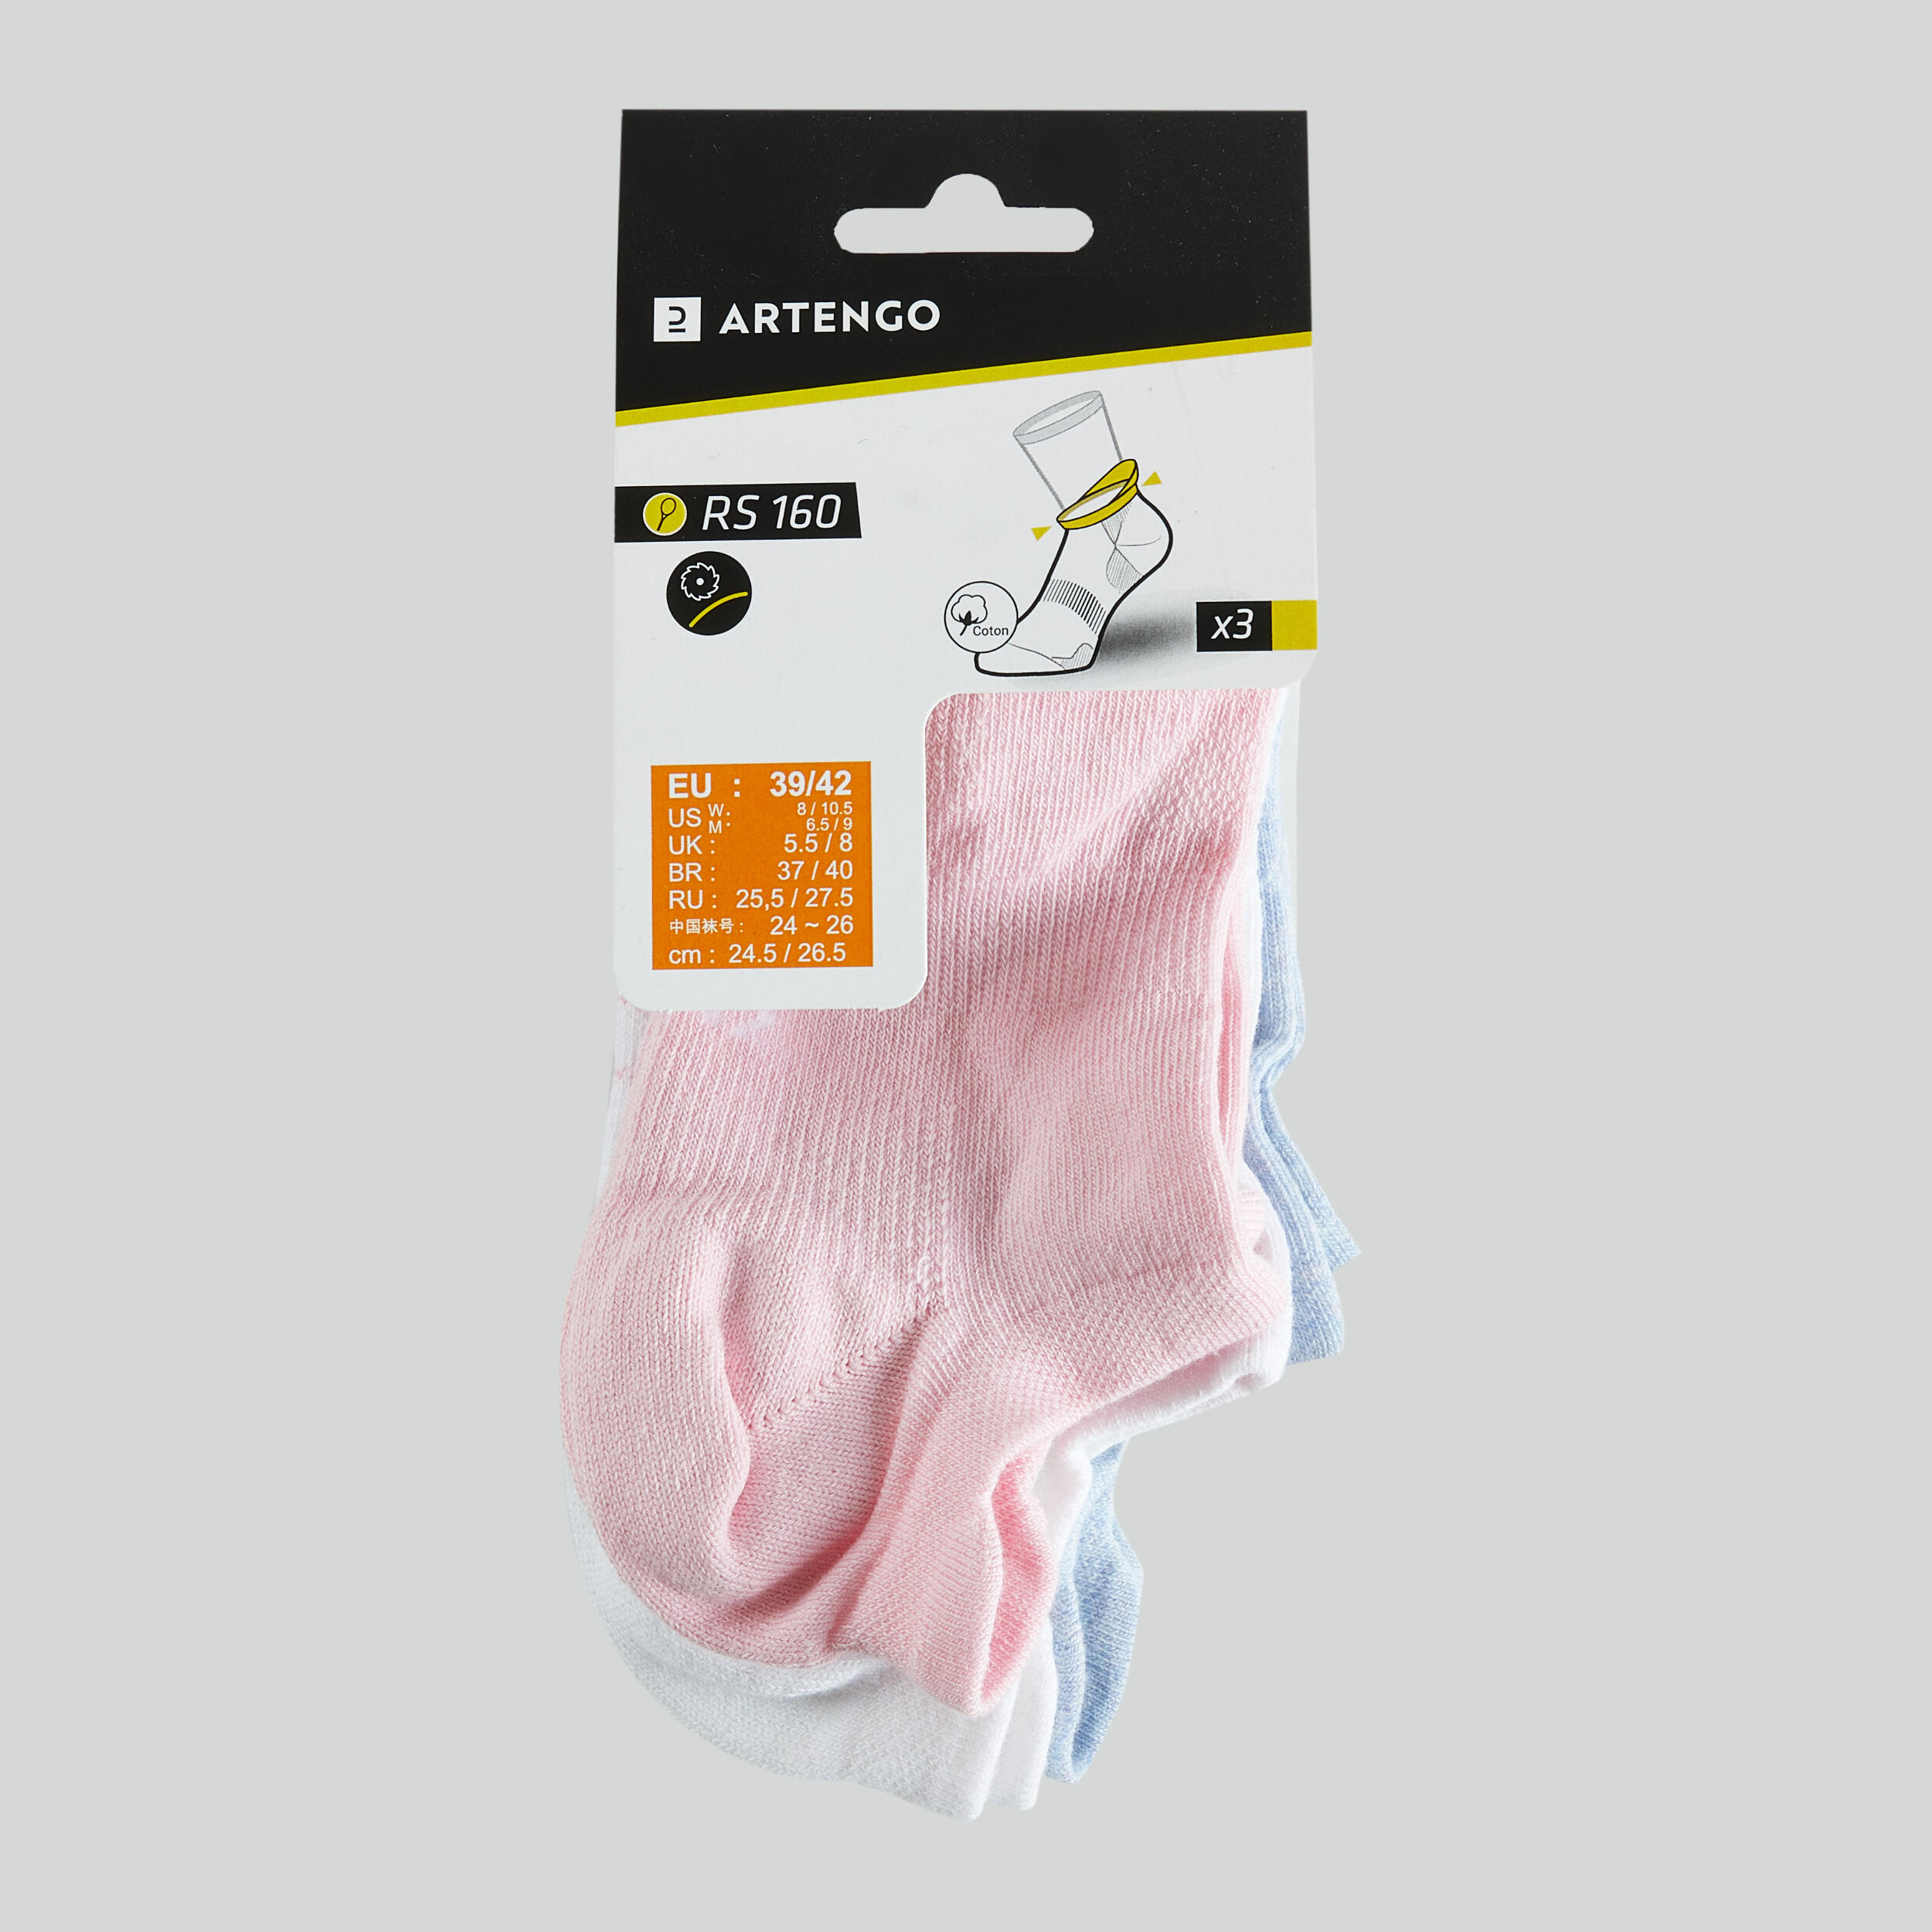 Low Sports Socks RS 160 Tri-Pack - Pink/White/China Blue 14/14